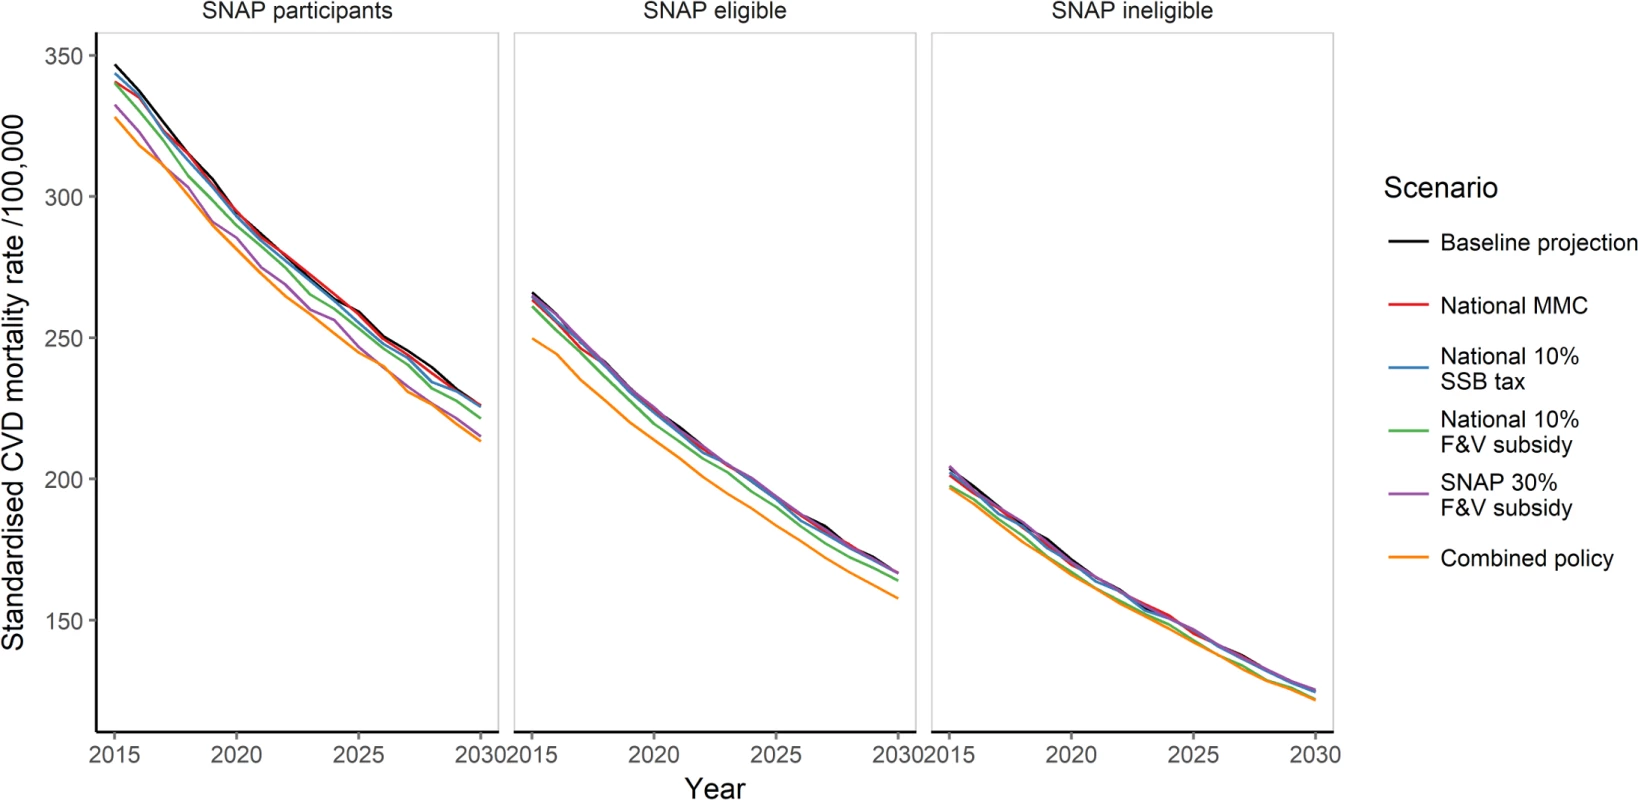 Standardised cardiovascular disease mortality rate (per 100,000 population) from 2015 to 2030 under for baseline projection and all policy scenarios, by SNAP group.